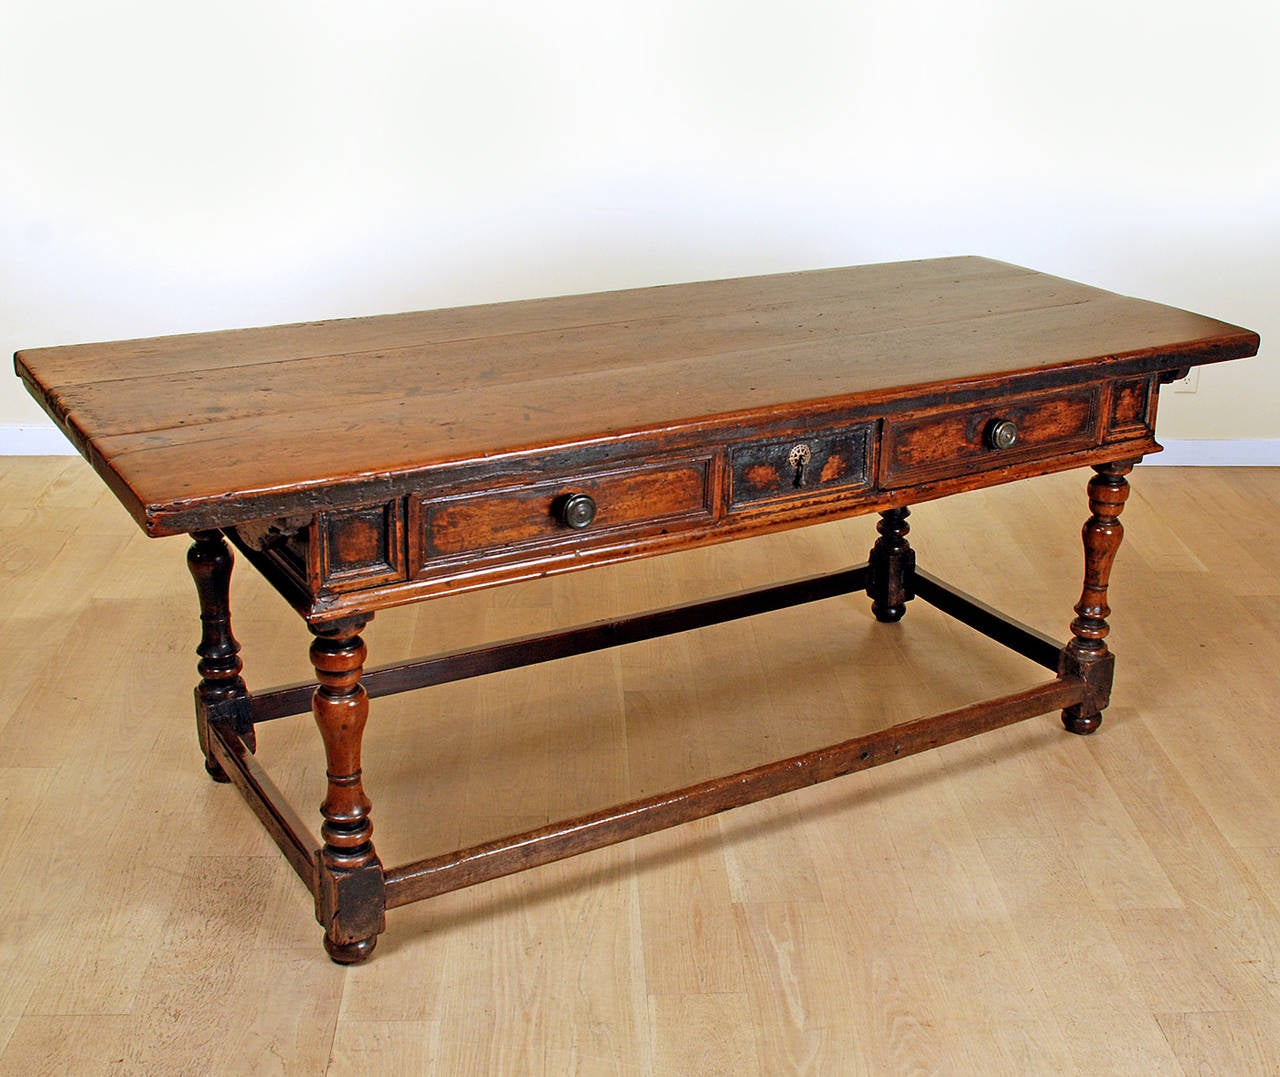 A stunning late 17th century Italian Baroque period walnut center table the thick rectangular top with battened ends over two drawers and turned legs connected by a stretcher base. Fixed center drawer flanked by two large operable drawers with